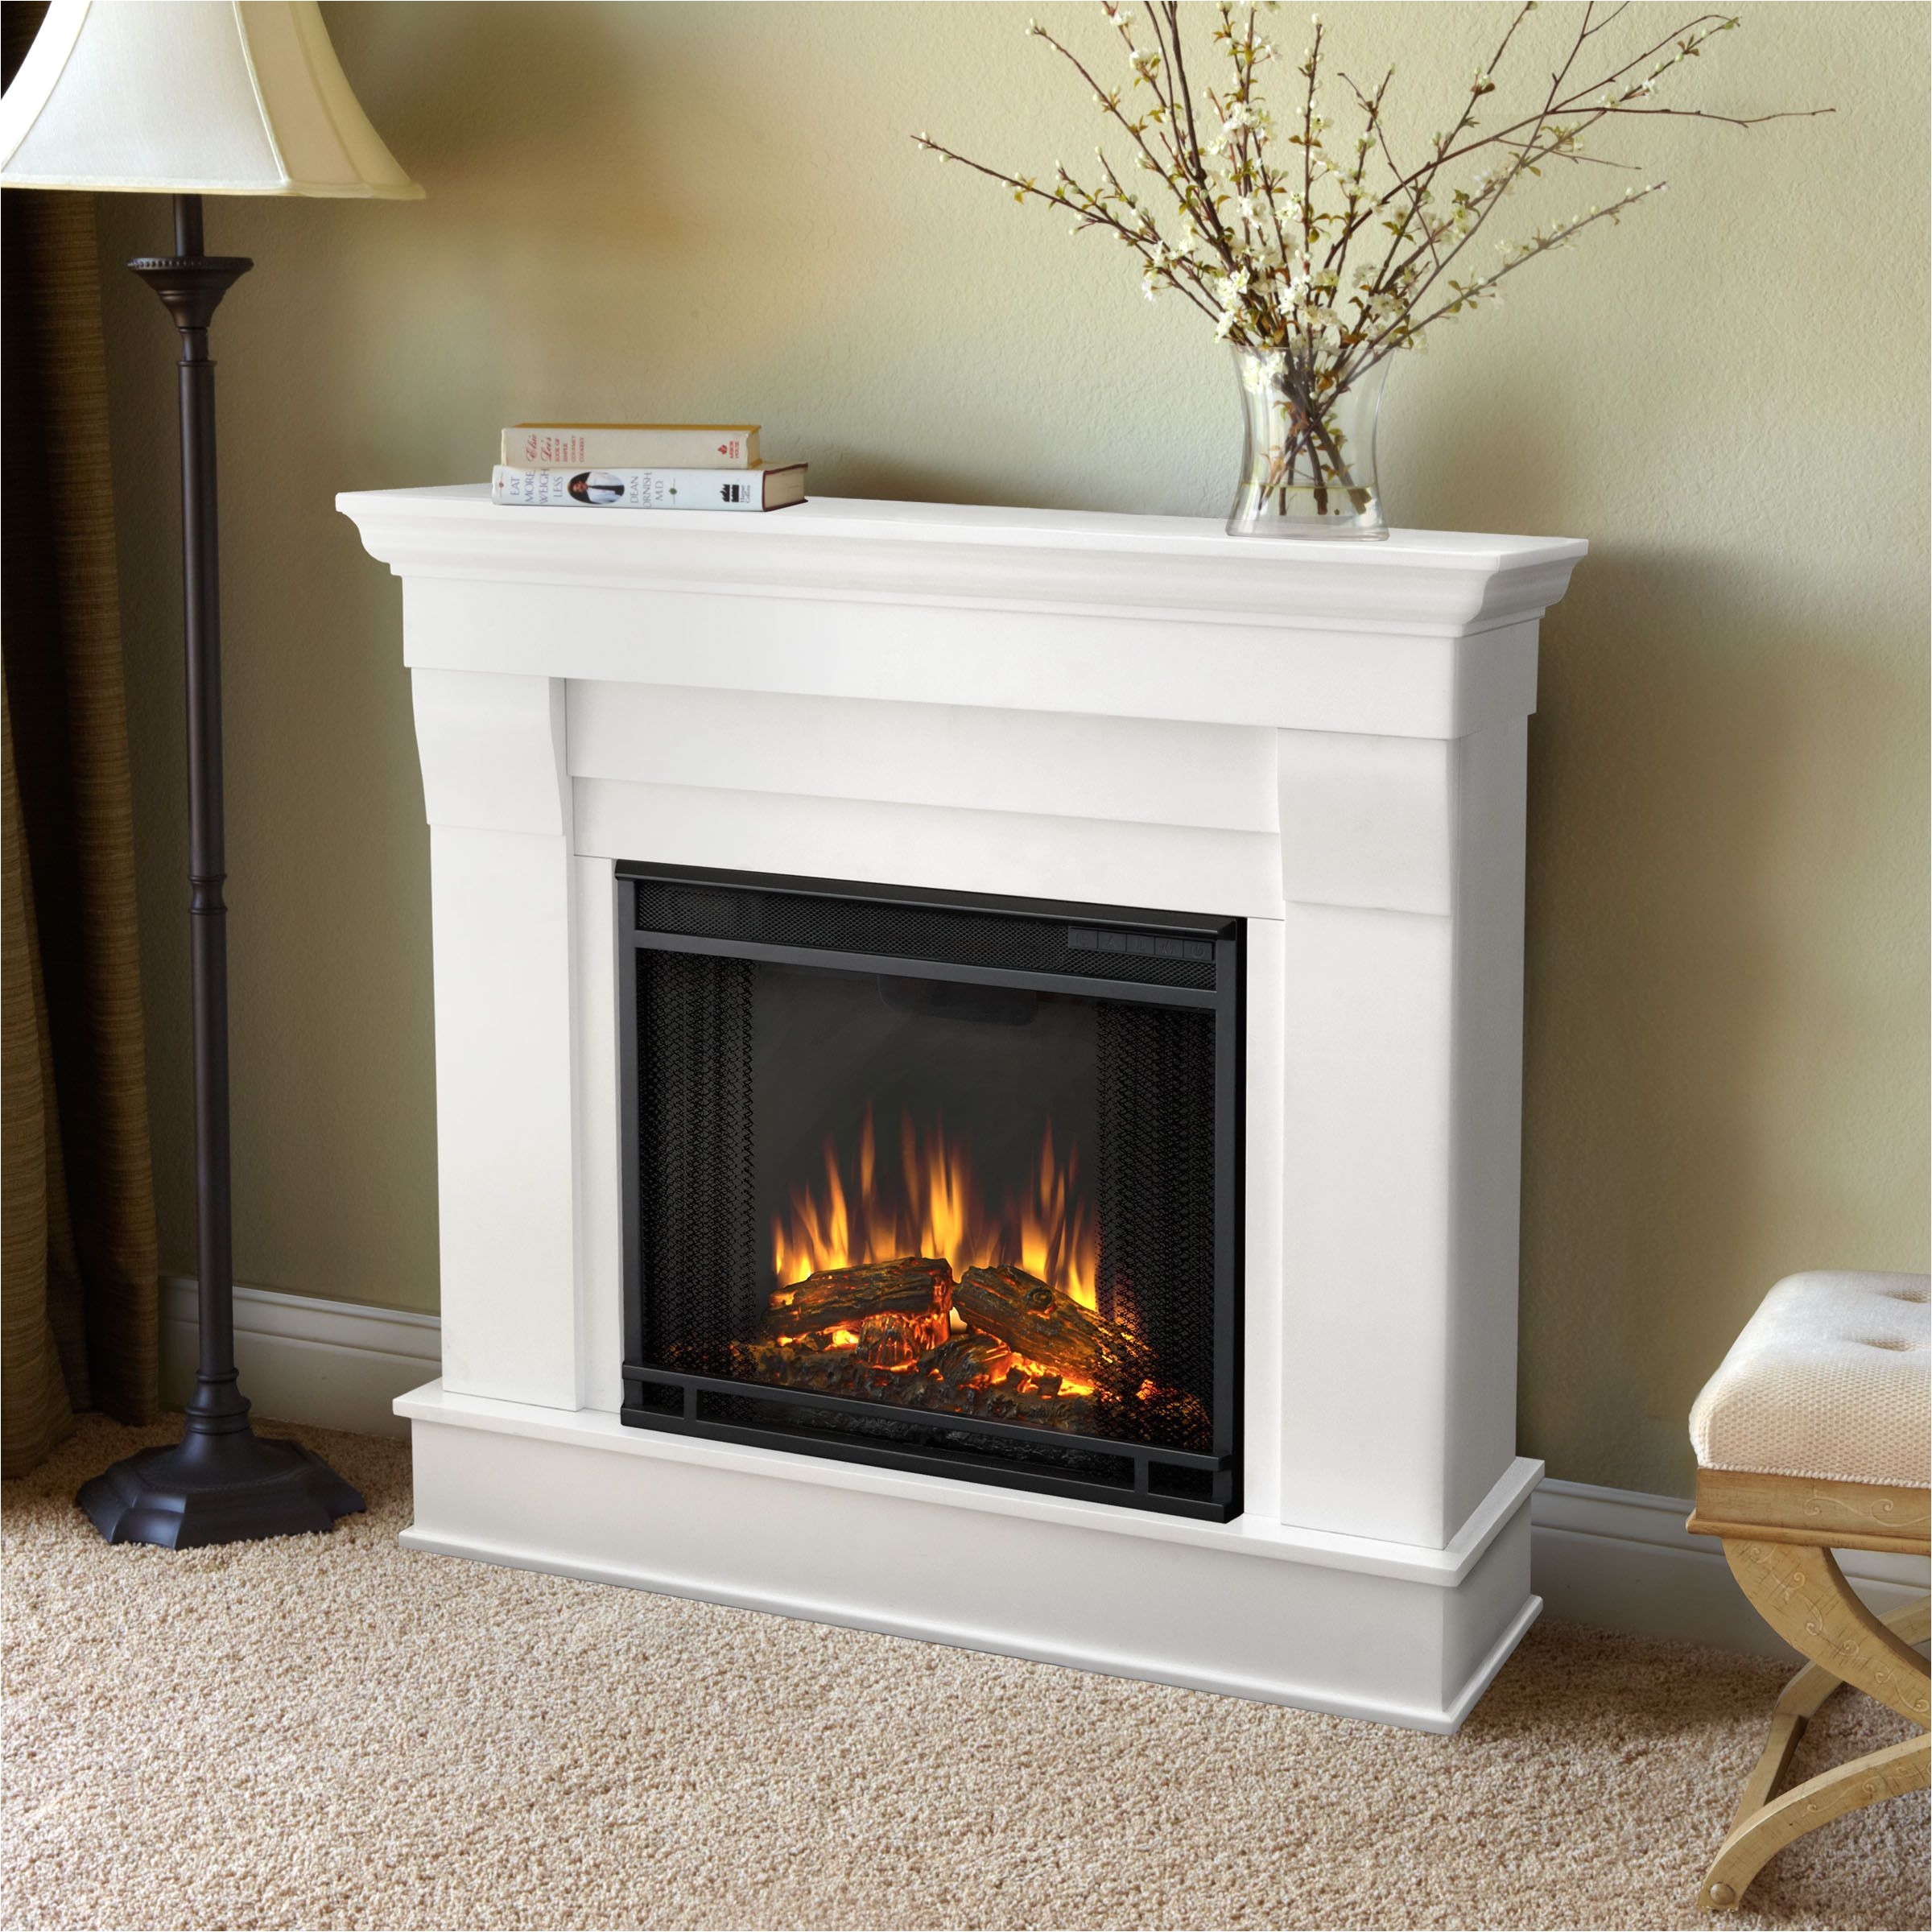 Fake Fireplace Mantel Kits Fresh Fake Fire Picture for Fireplace Real Flame Chateau Electric